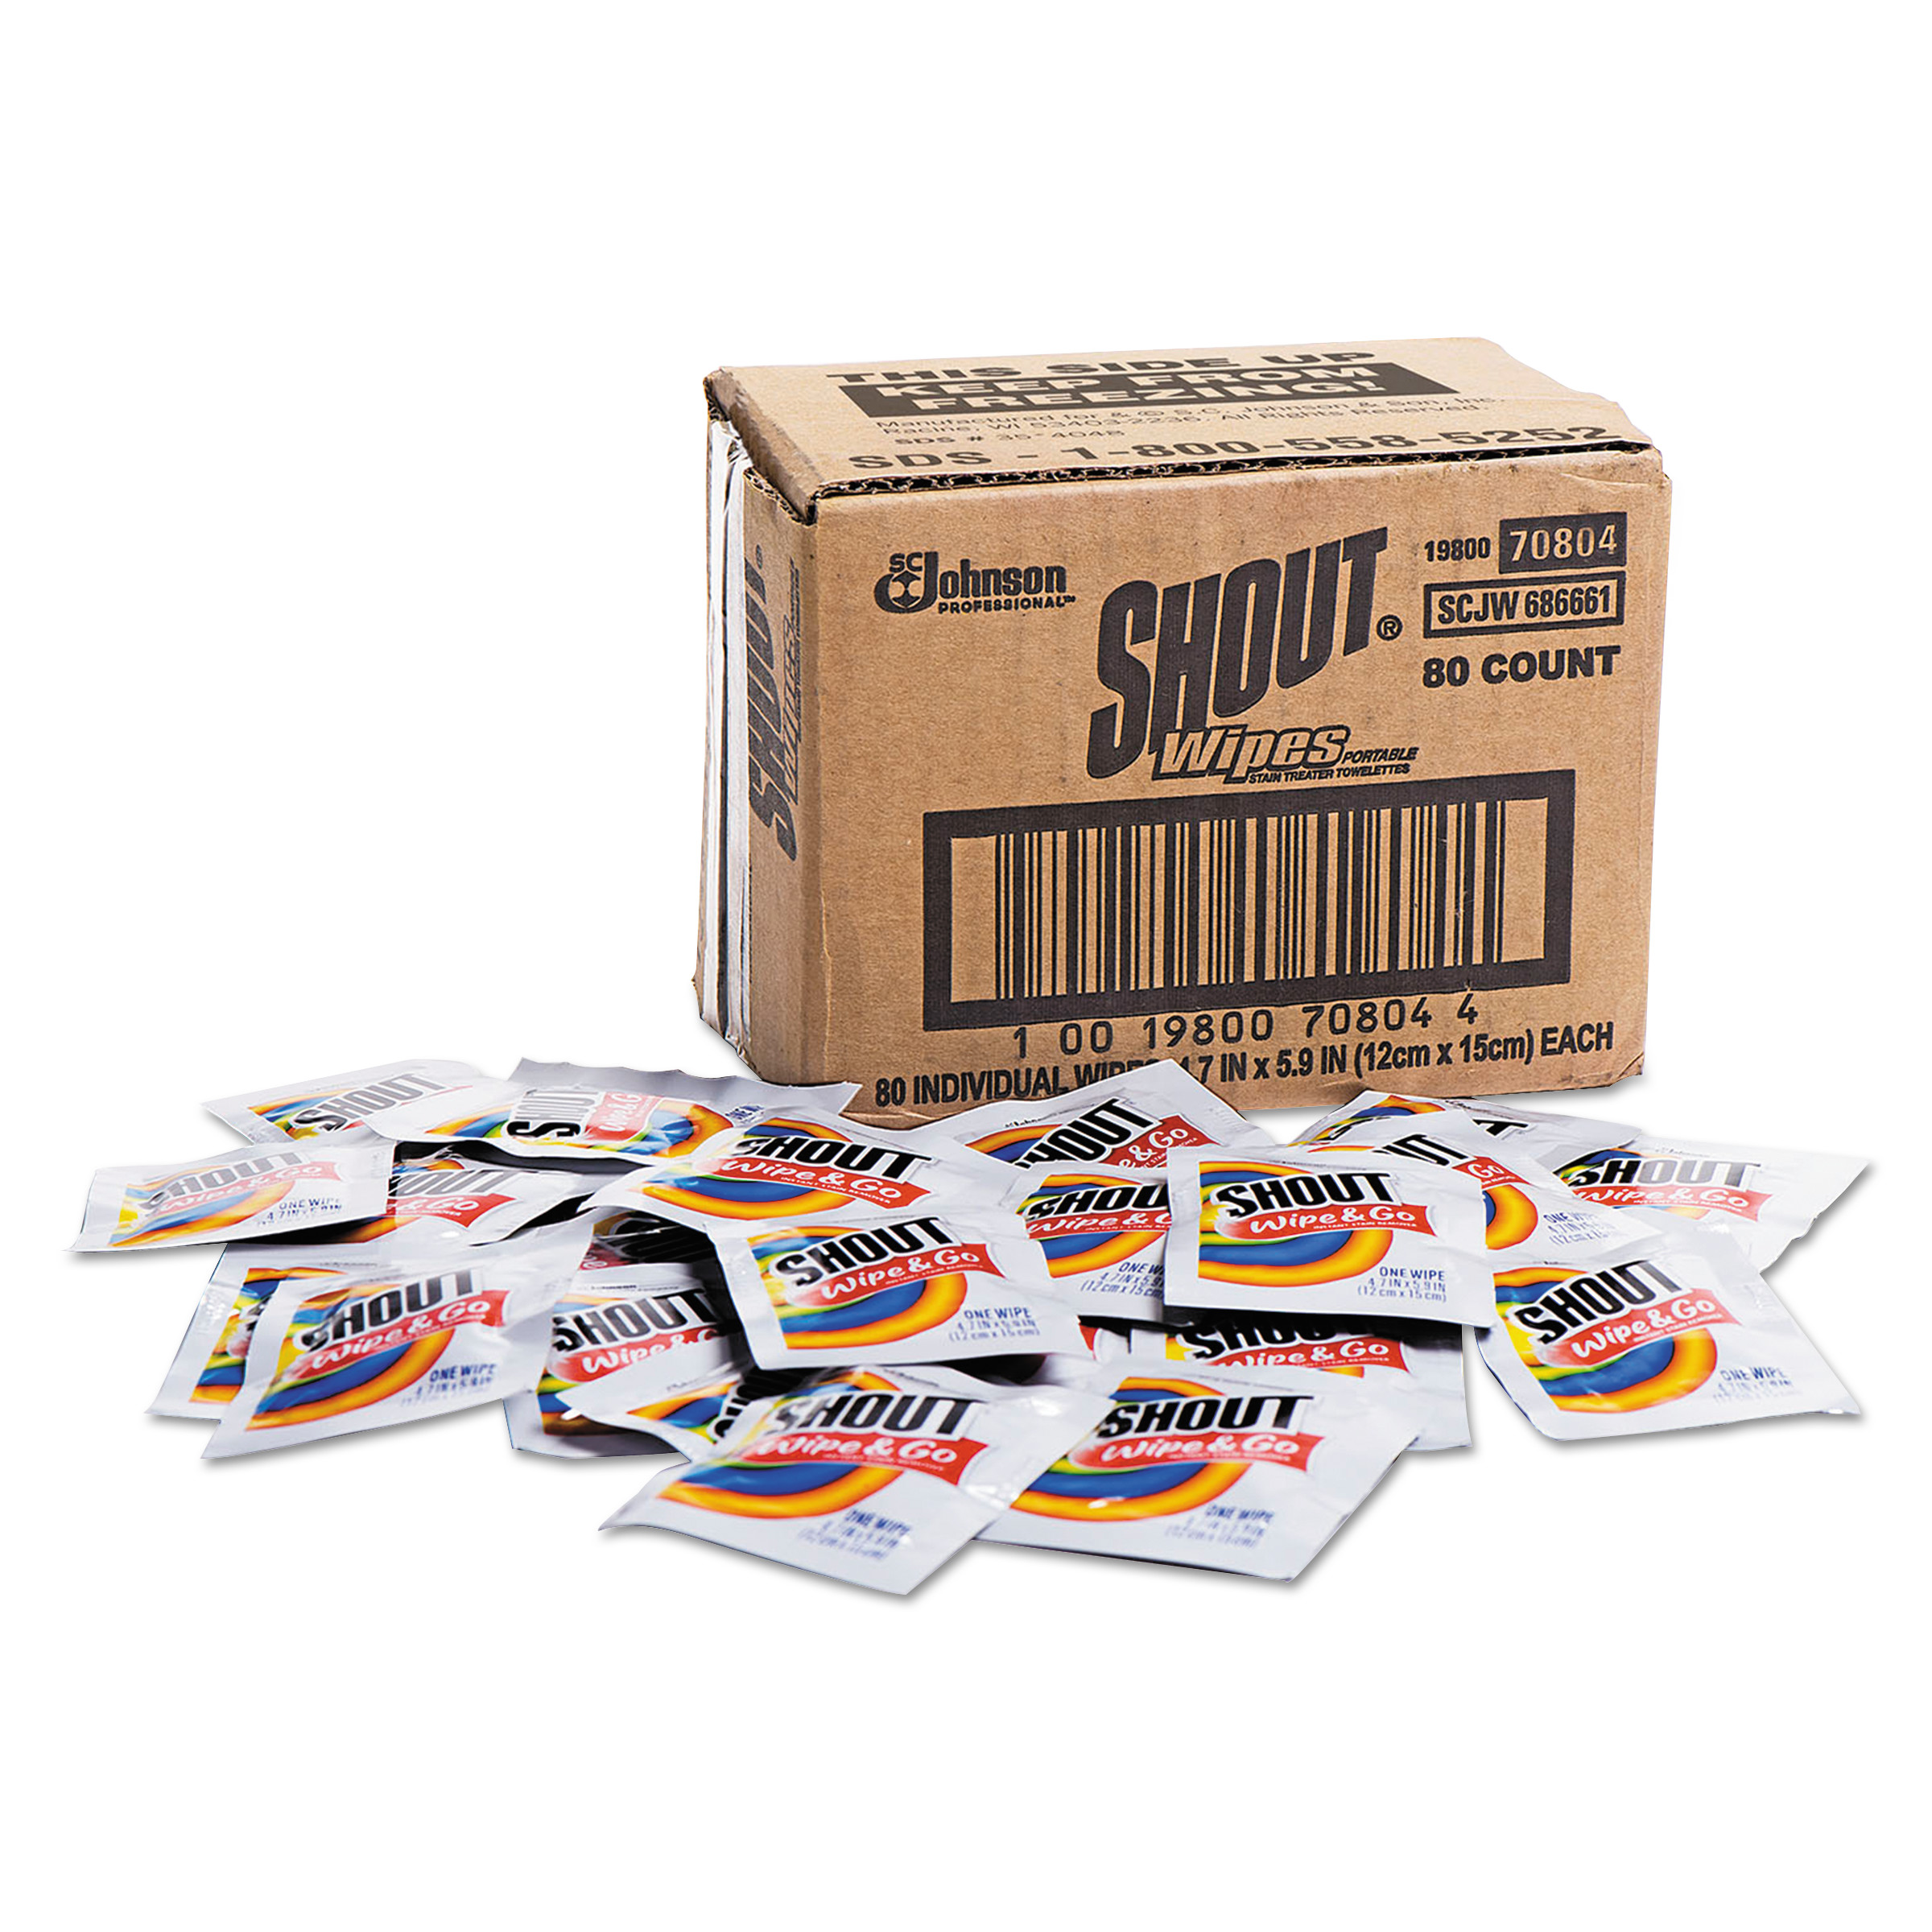  Shout 686661 Wipe & Go Instant Stain Remover, 4.7 x 5.9, 80 Packets/Carton (SJN686661) 